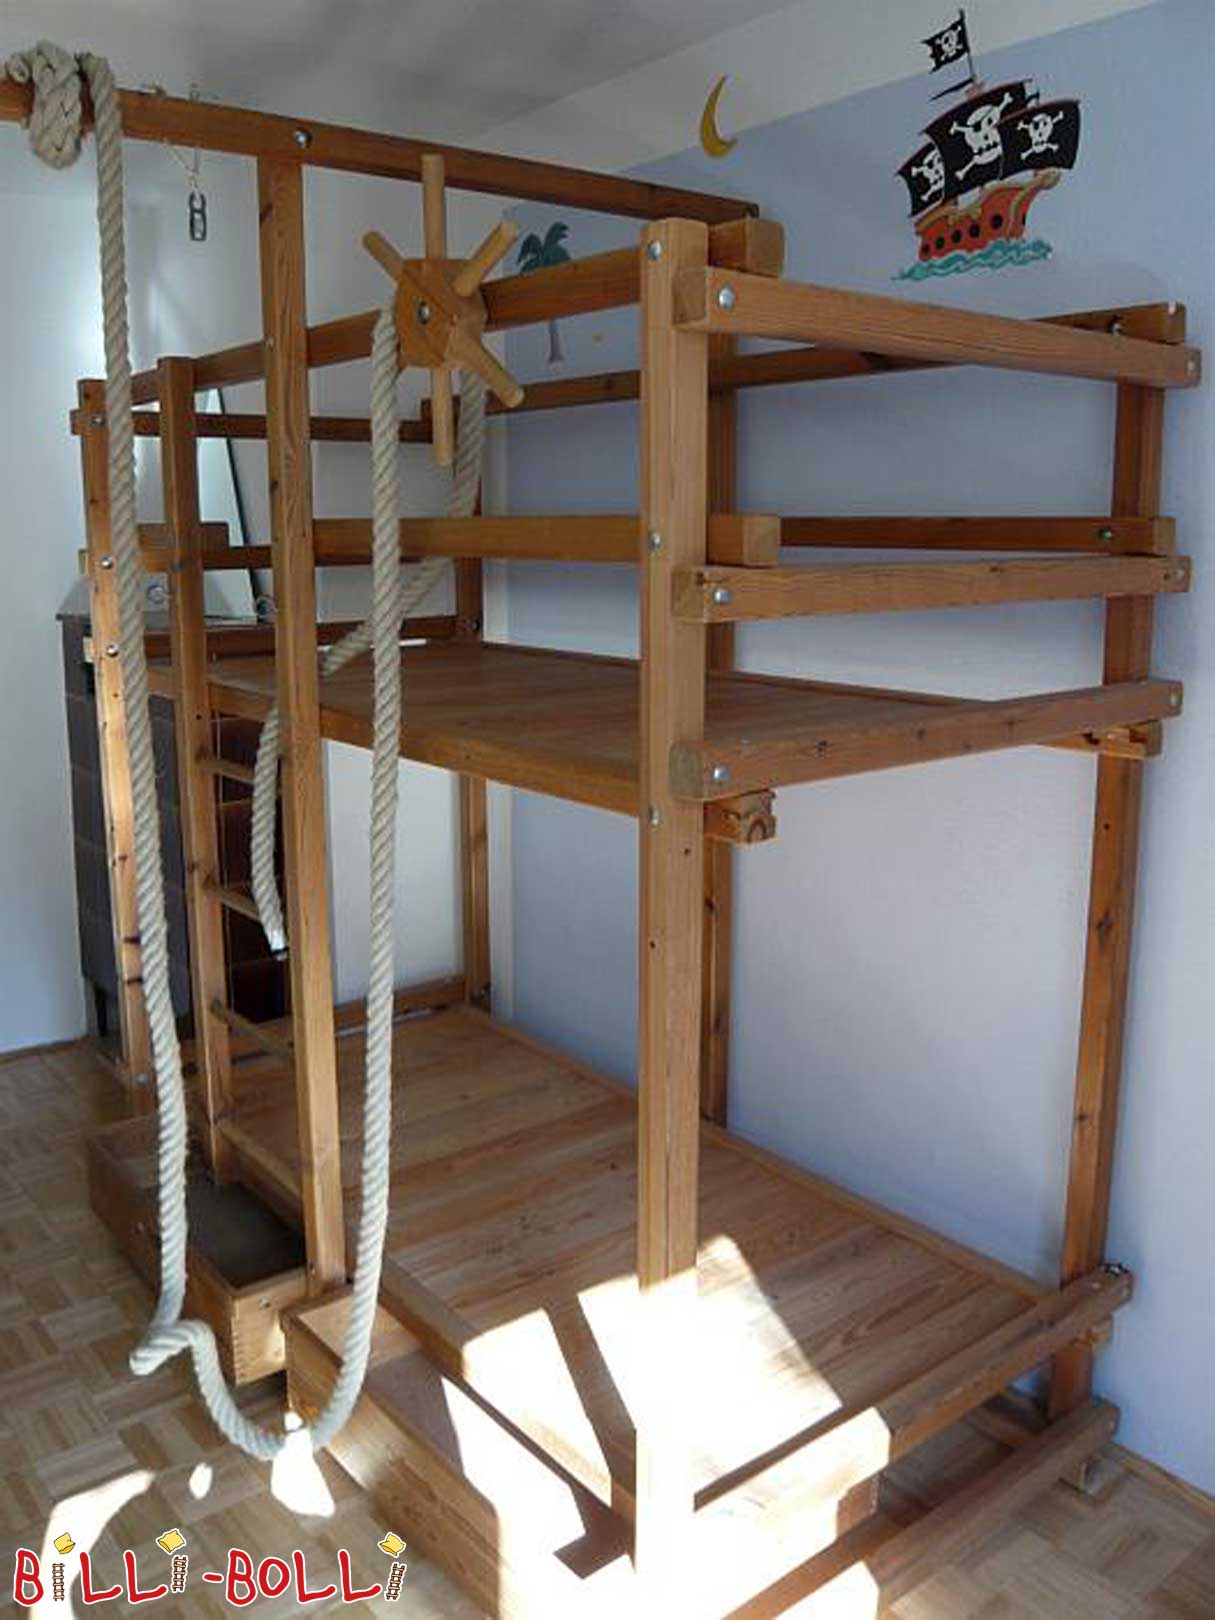 Gullibo bunk bed (pirate bed) (Category: second hand bunk bed)